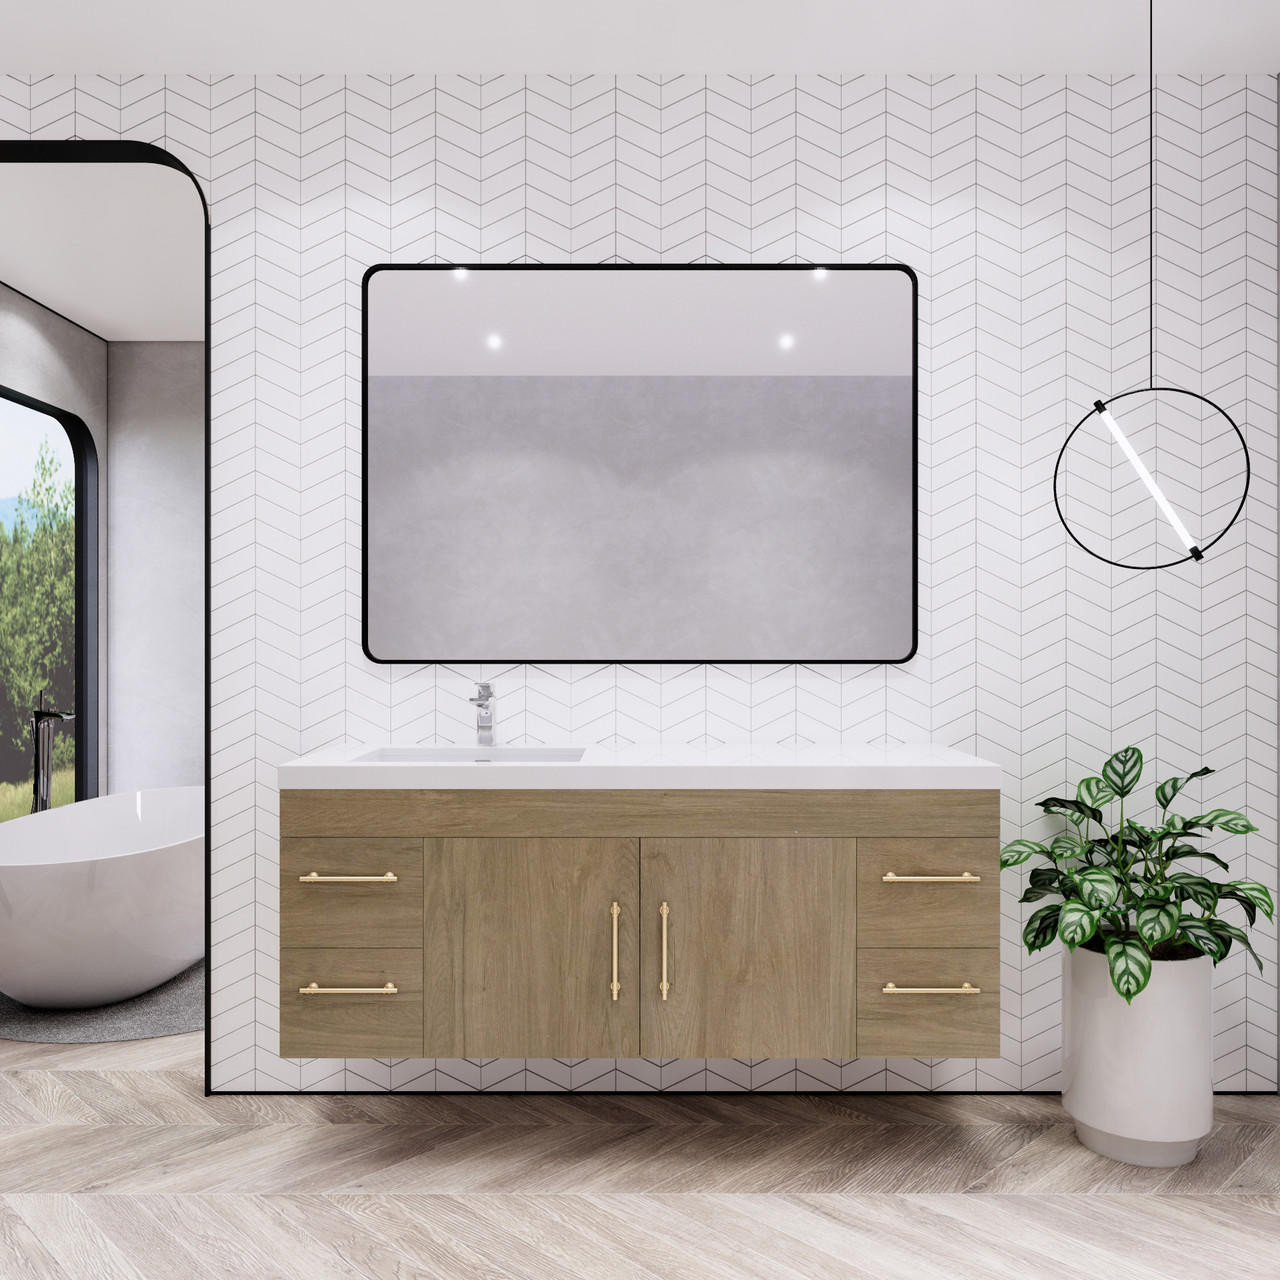 ELSA 60" WALL MOUNTED VANITY WITH SINGLE ROYAL WHITE ACRYLIC SINK (LEFT SIDE) in Natural Oak